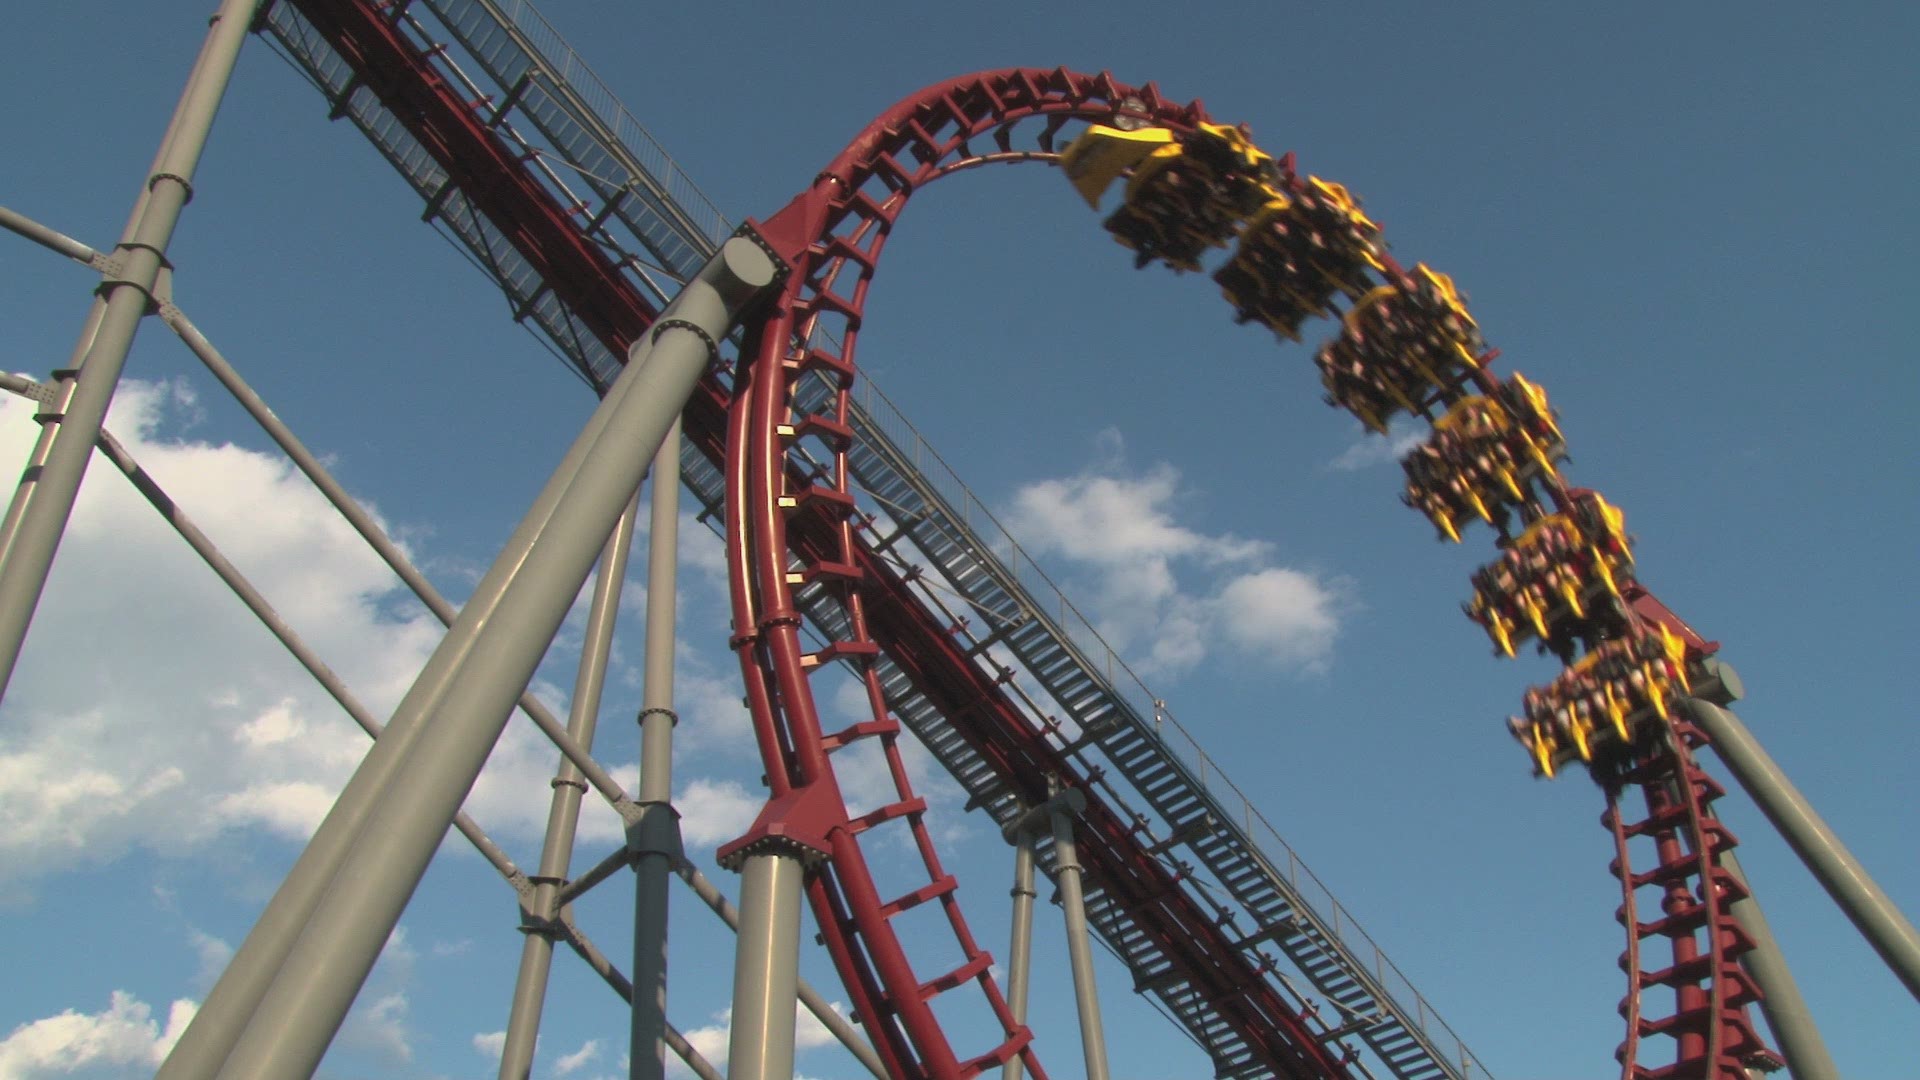 Sept. 27, 2018: The ride first opened in 2001 as X-Flight at the former Geauga Lake property in Aurora when the park was owned by Six Flags. The coaster was later moved to Kings Island and renamed Firehawk.